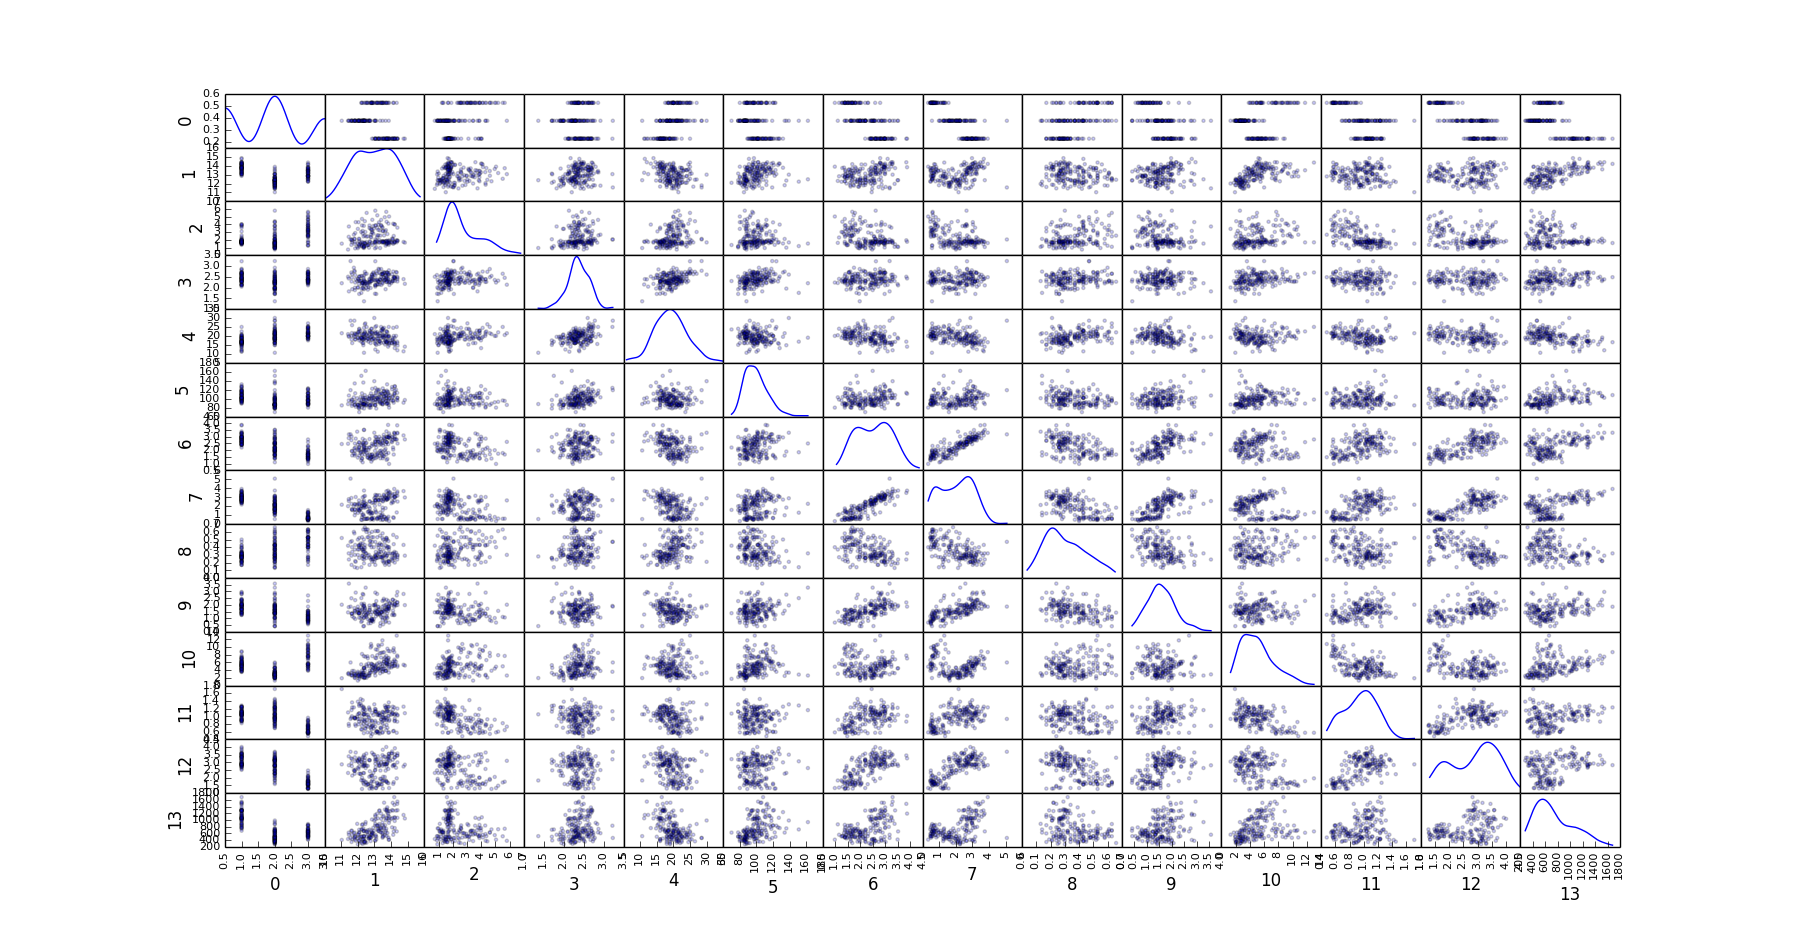 Scatter Matrix of all features from the Wine Quality Dataset